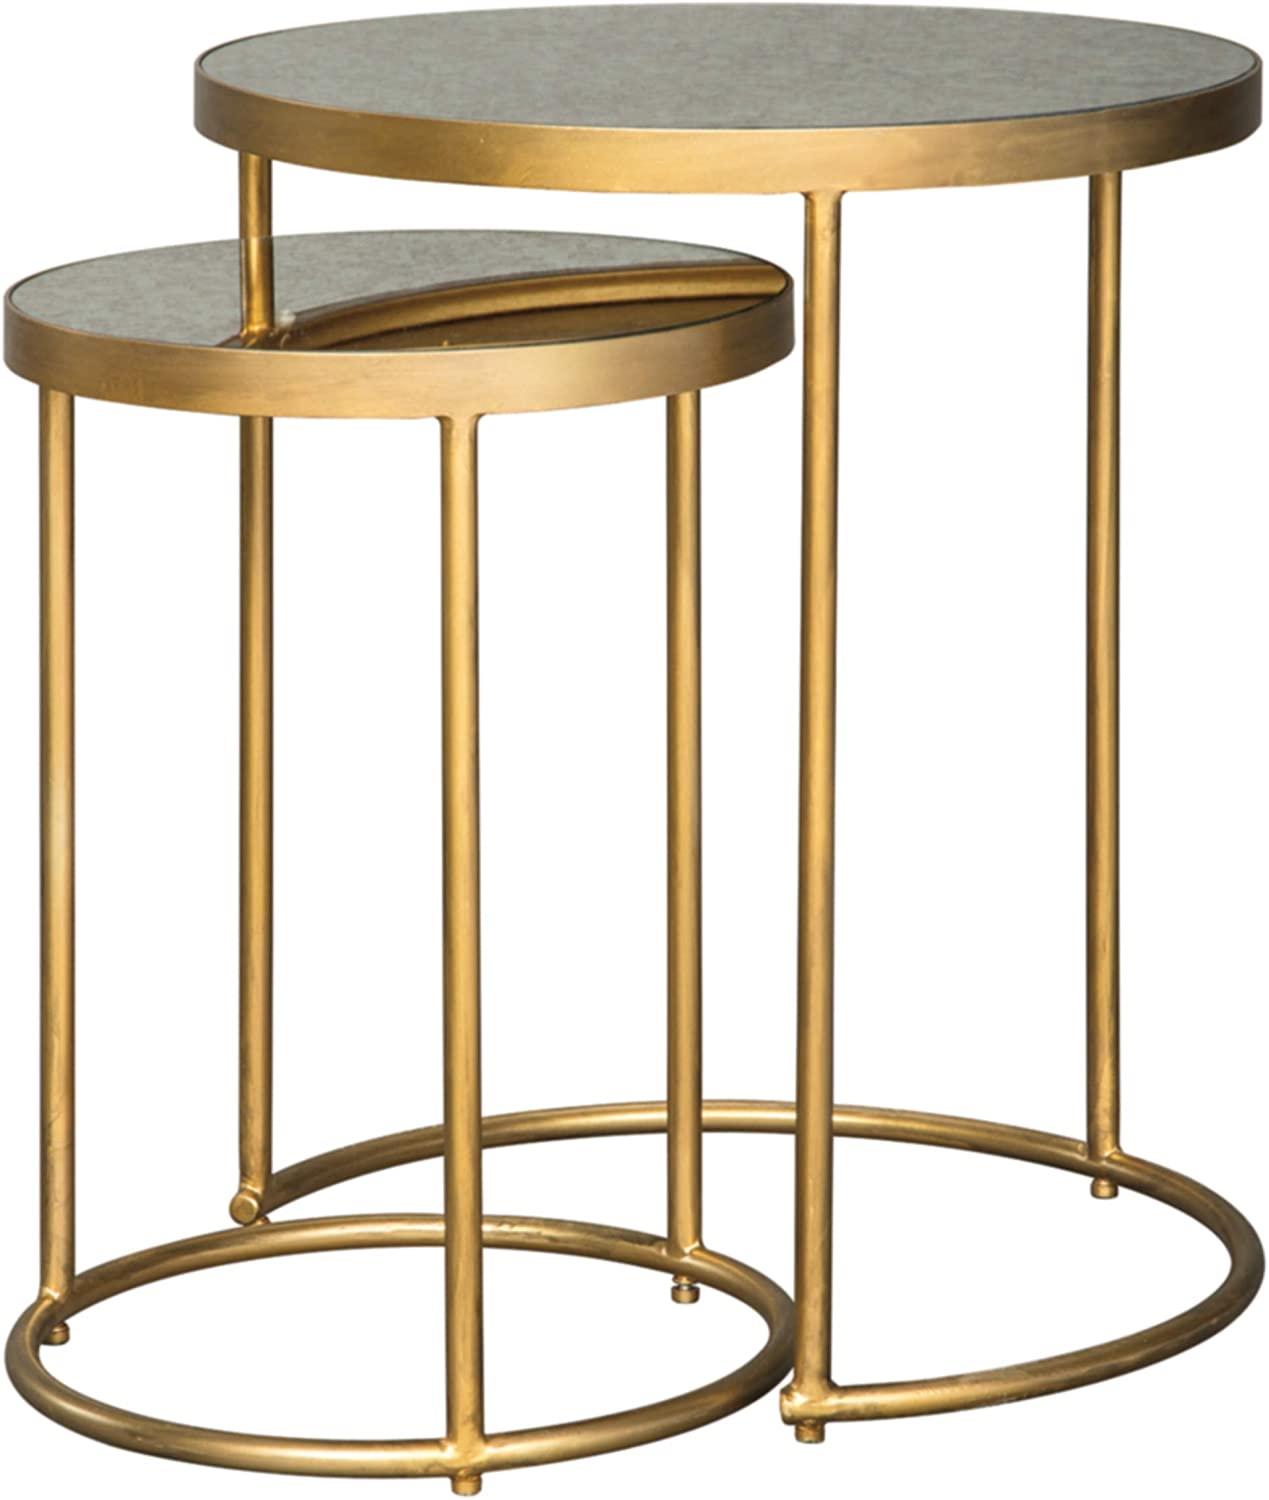 Nest Of Tables Nesting Accent Table Set of 2, Gold Metal 